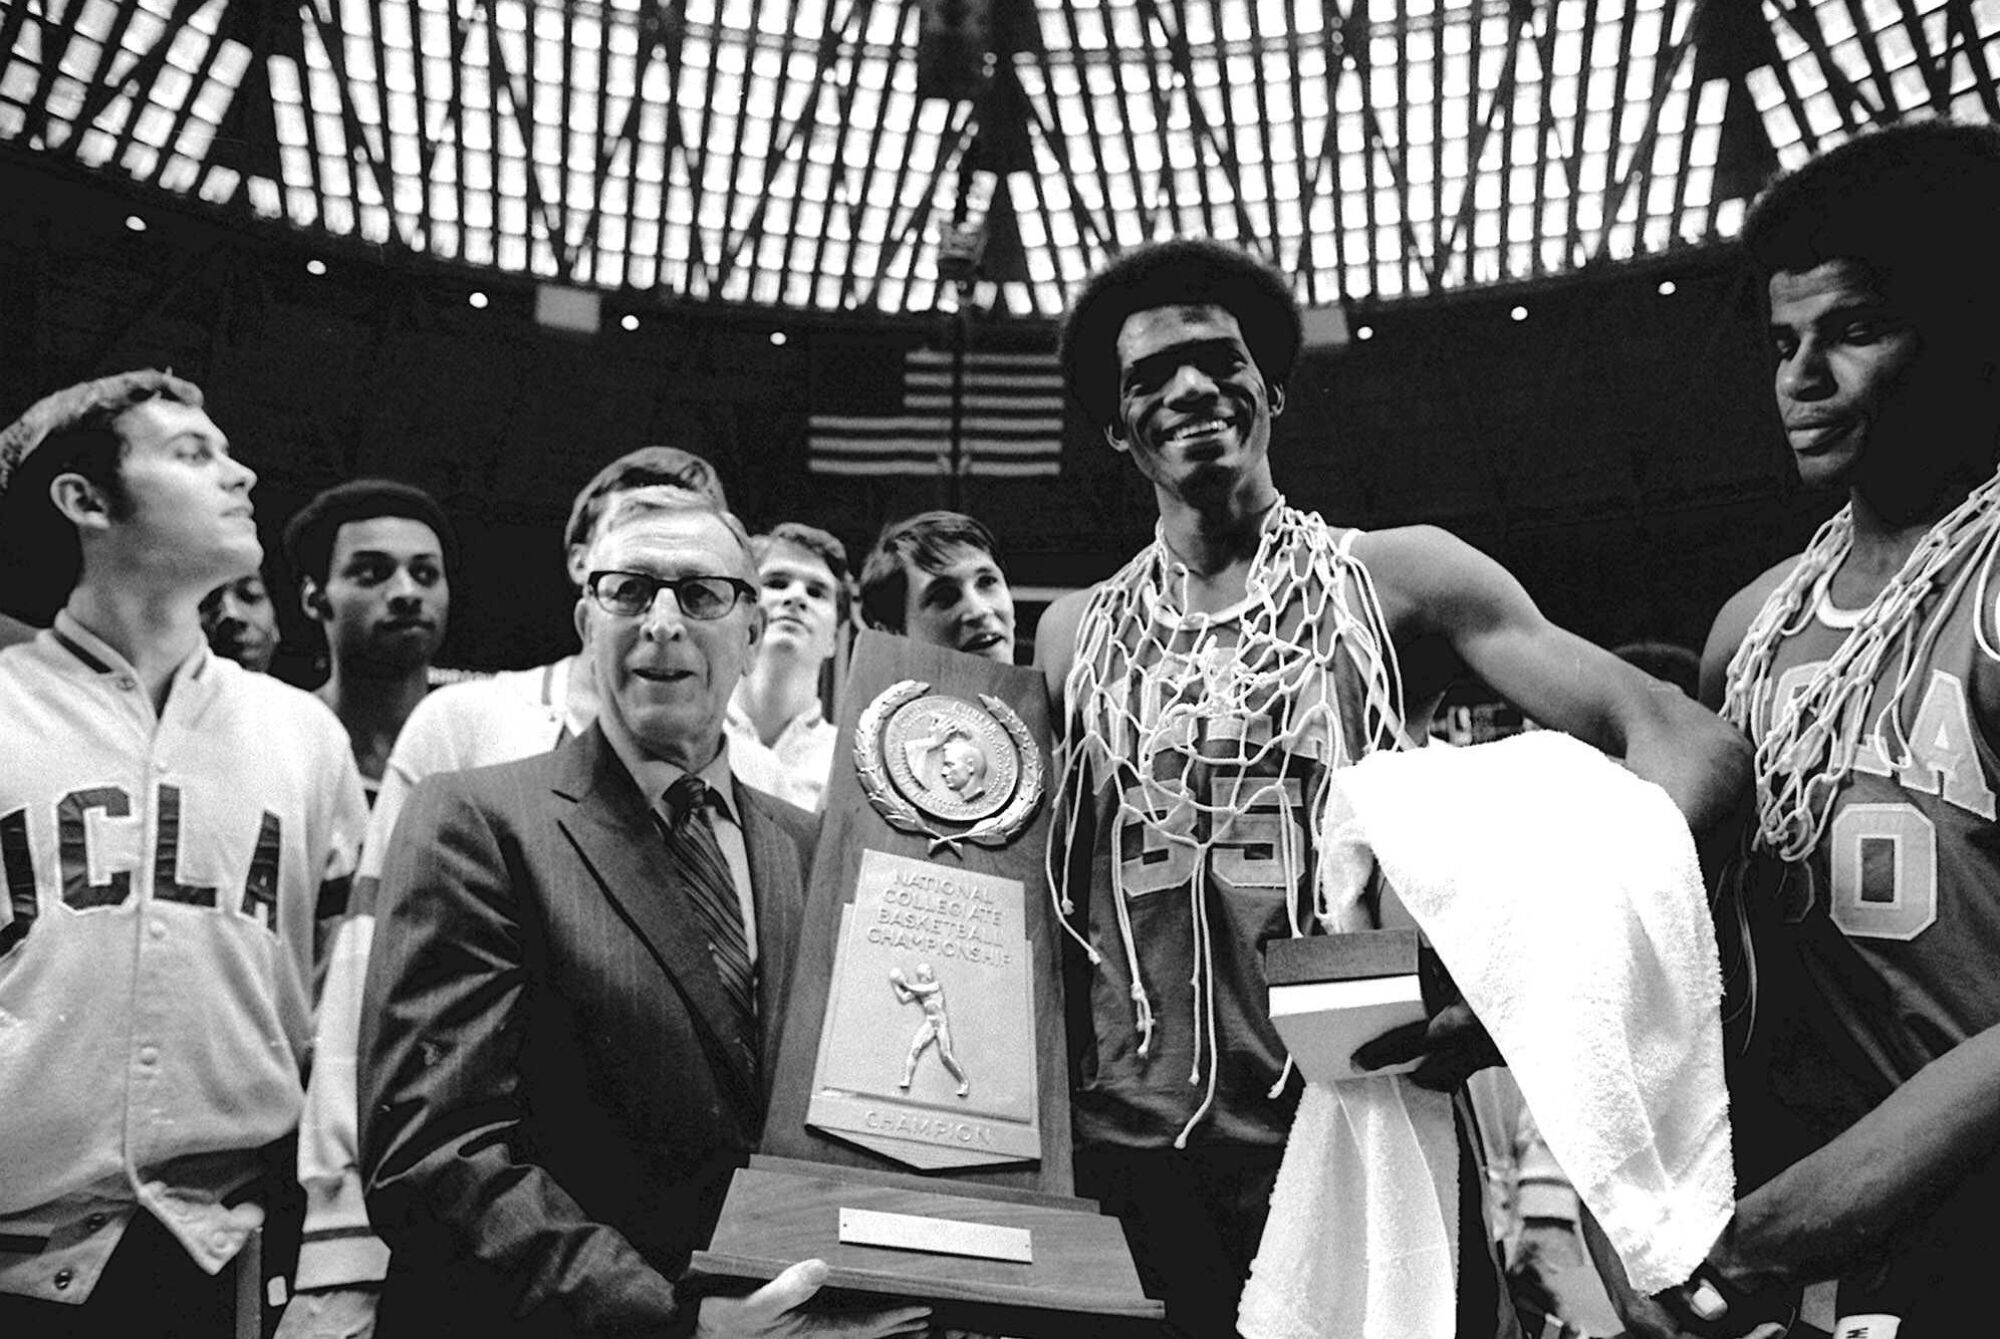 UCLA basketball coach John Wooden celebrates with Sidney Wicks and other UCLA players.